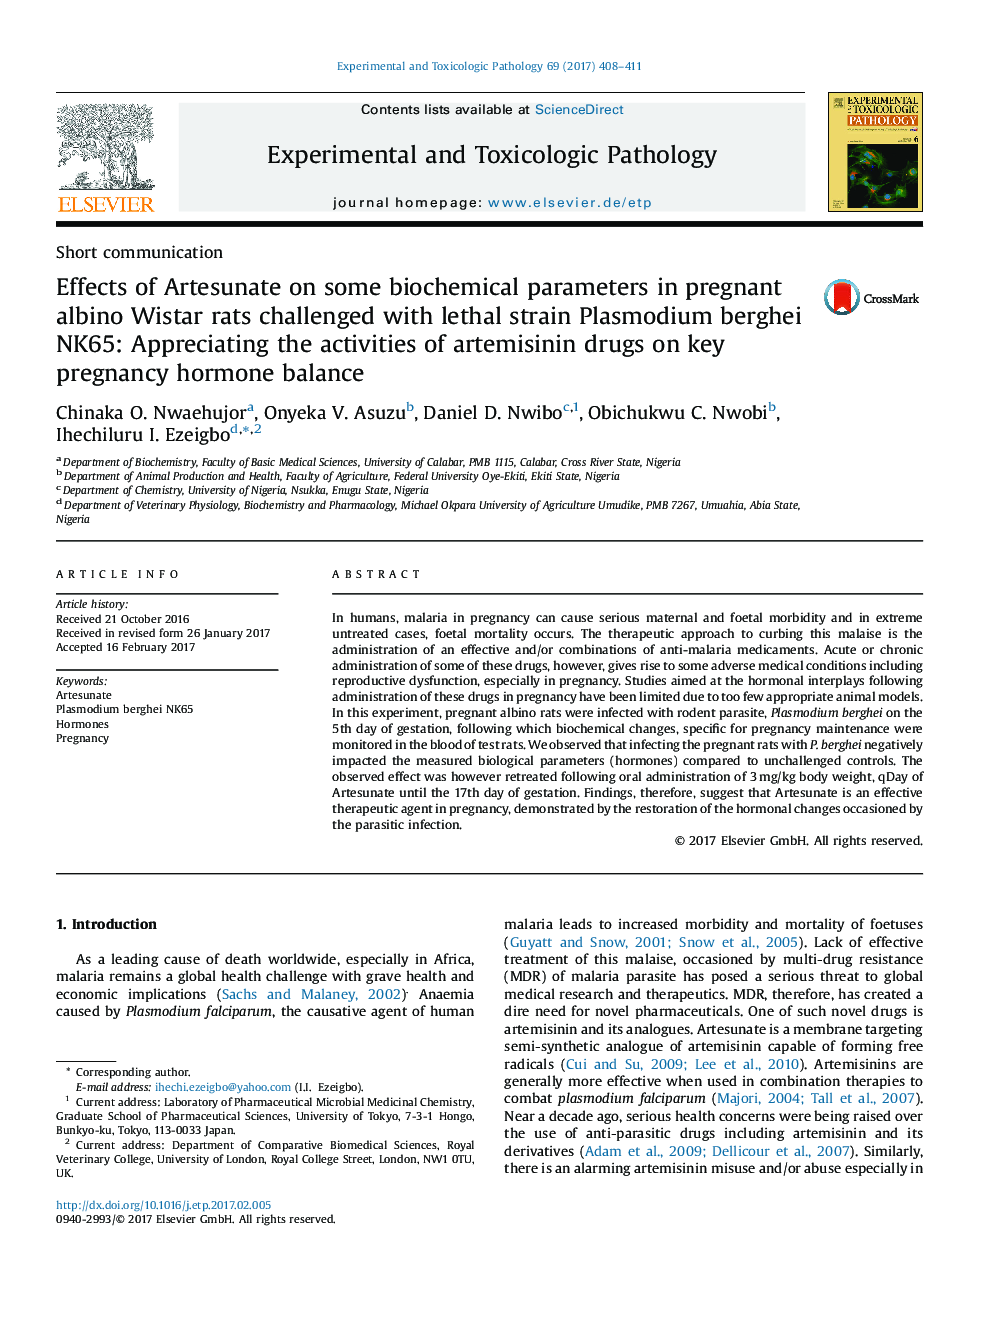 Effects of Artesunate on some biochemical parameters in pregnant albino Wistar rats challenged with lethal strain Plasmodium berghei NK65: Appreciating the activities of artemisinin drugs on key pregnancy hormone balance